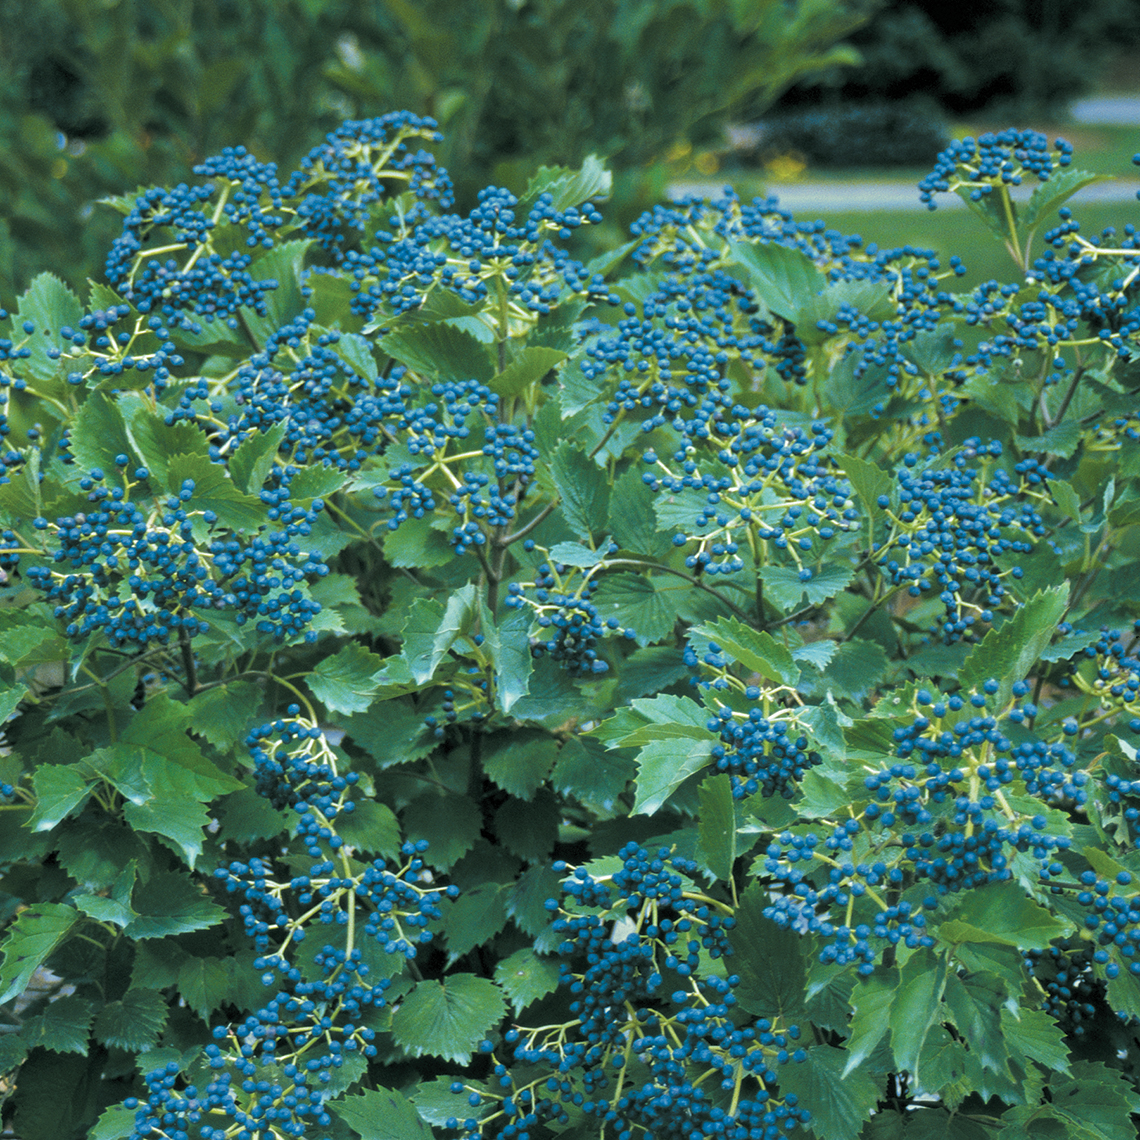 Clusters of blue fruit on Blue Muffin viburnum